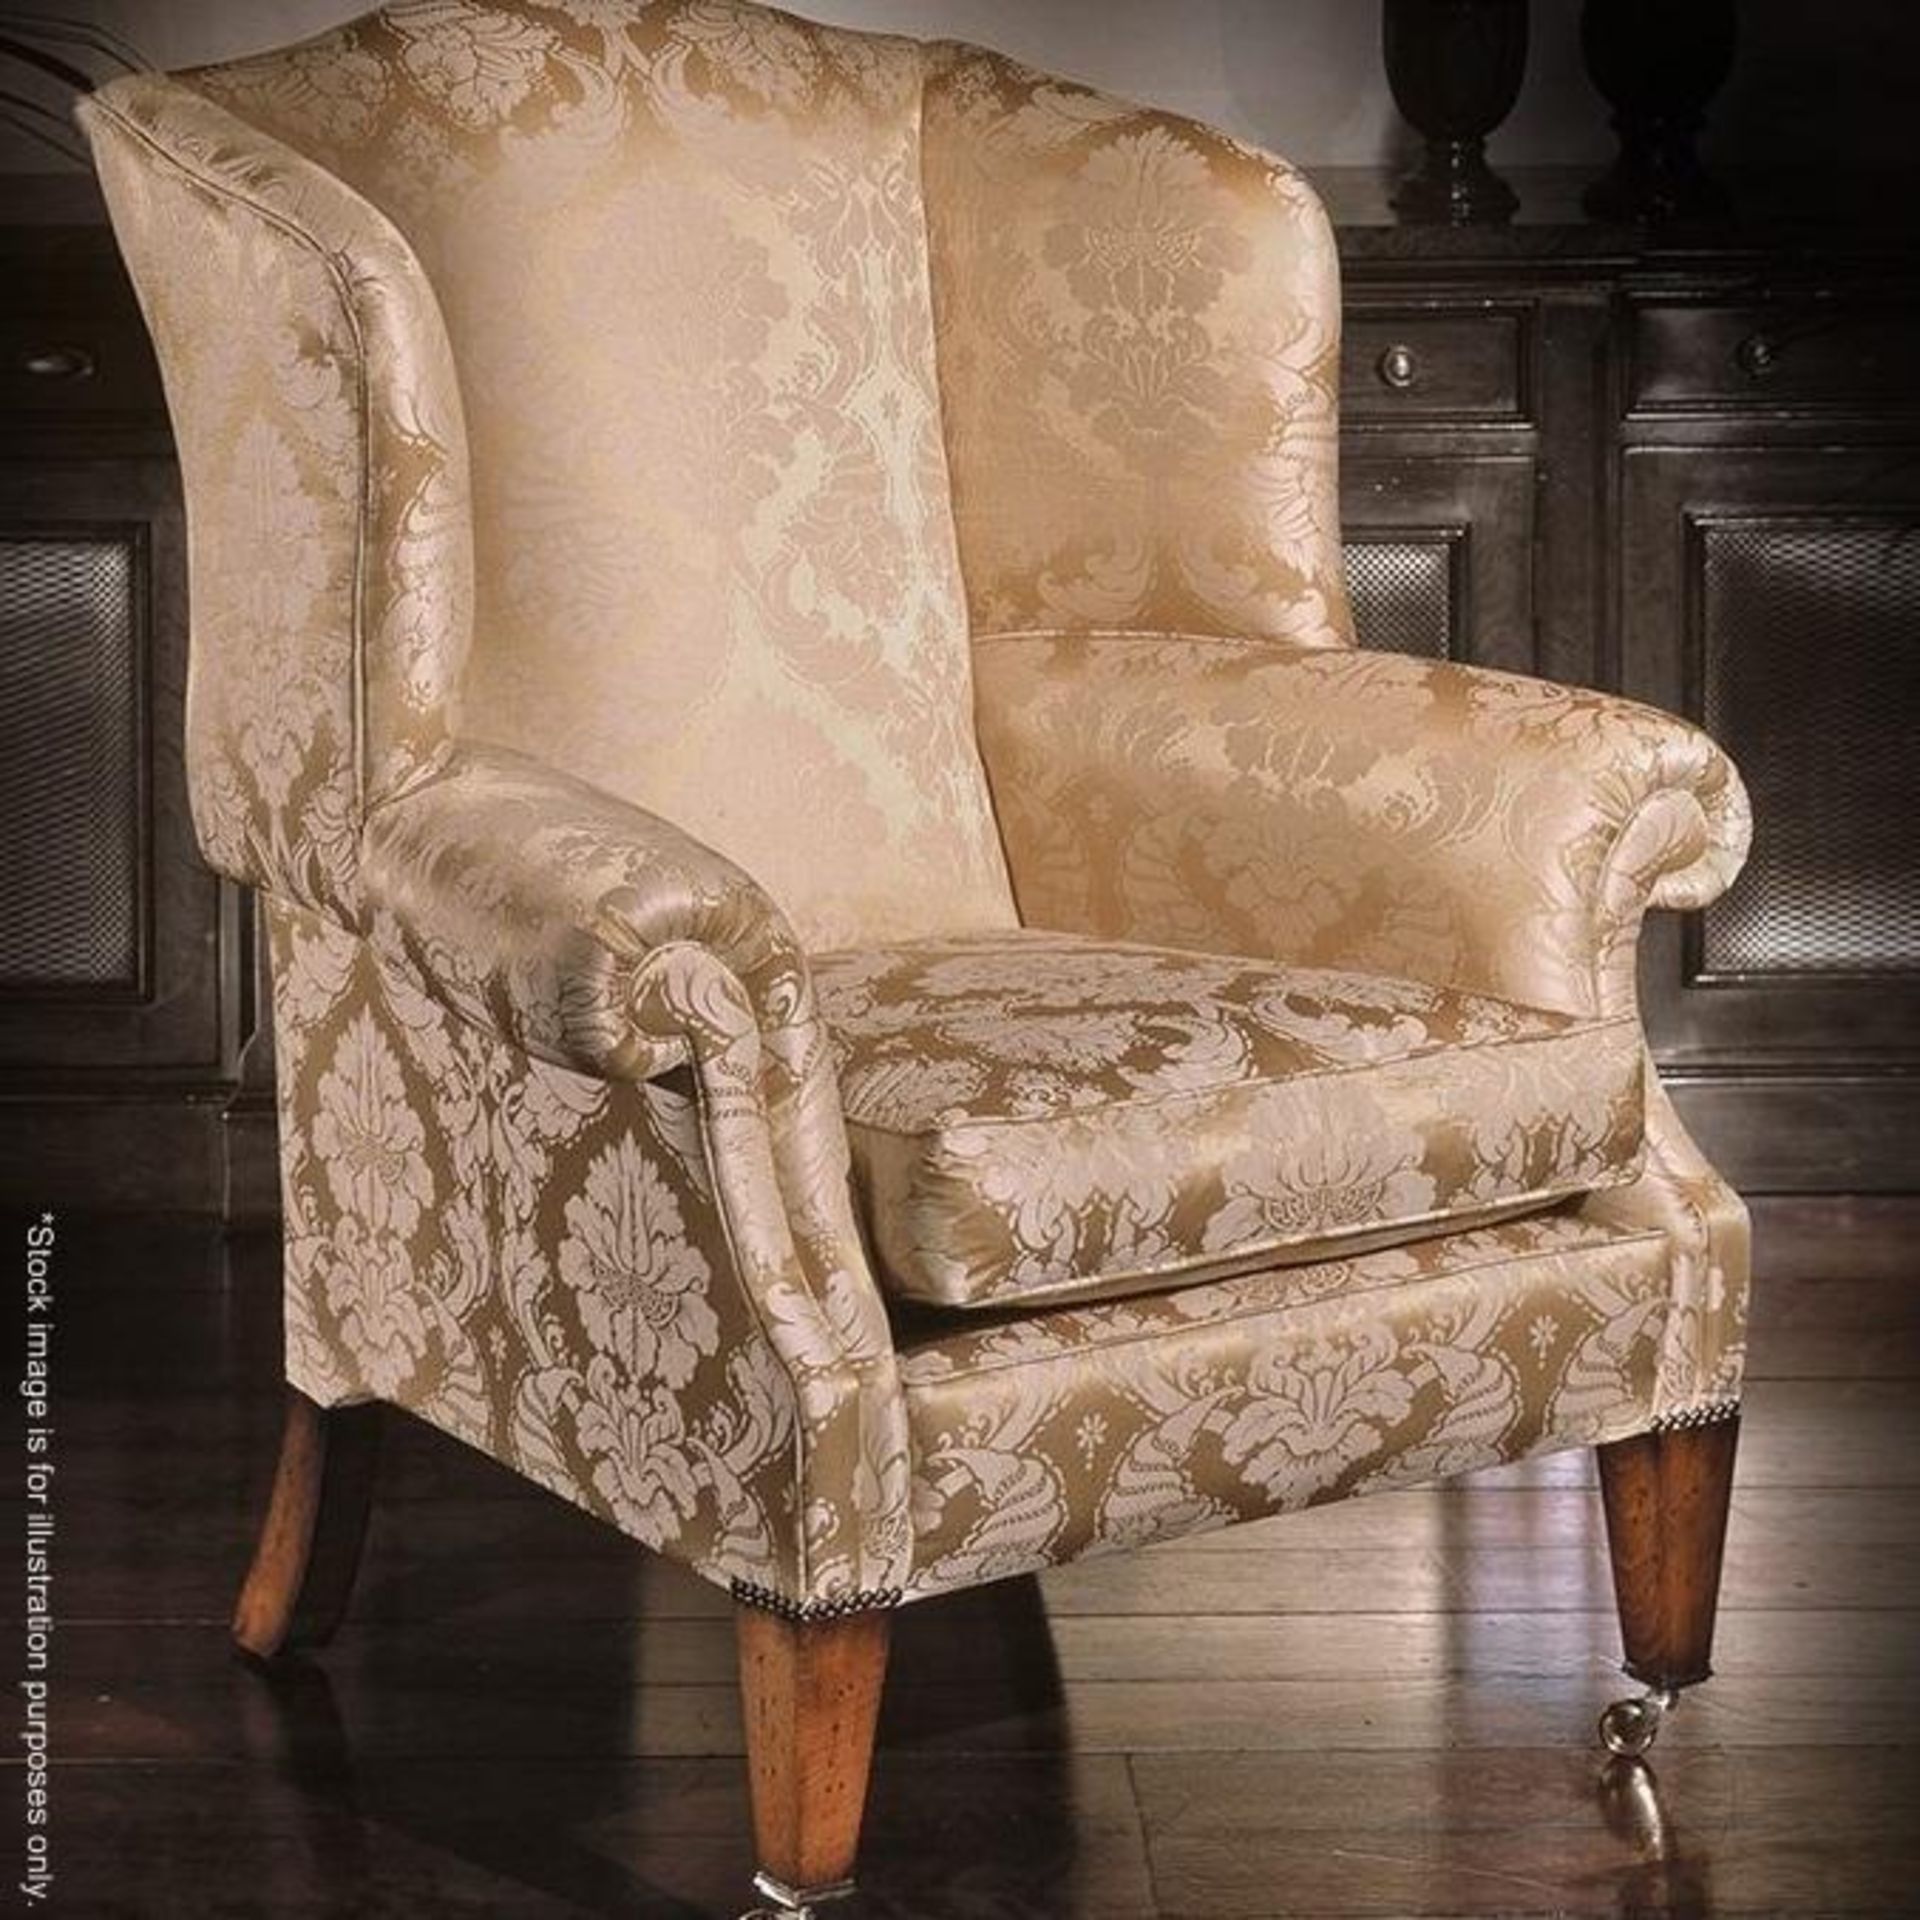 1 x Duresta "Somerset" Wing Chair Light Blue - Dimensions: 113H x 91W x 92D cms - Ref: 3143184-A NP1 - Image 7 of 7